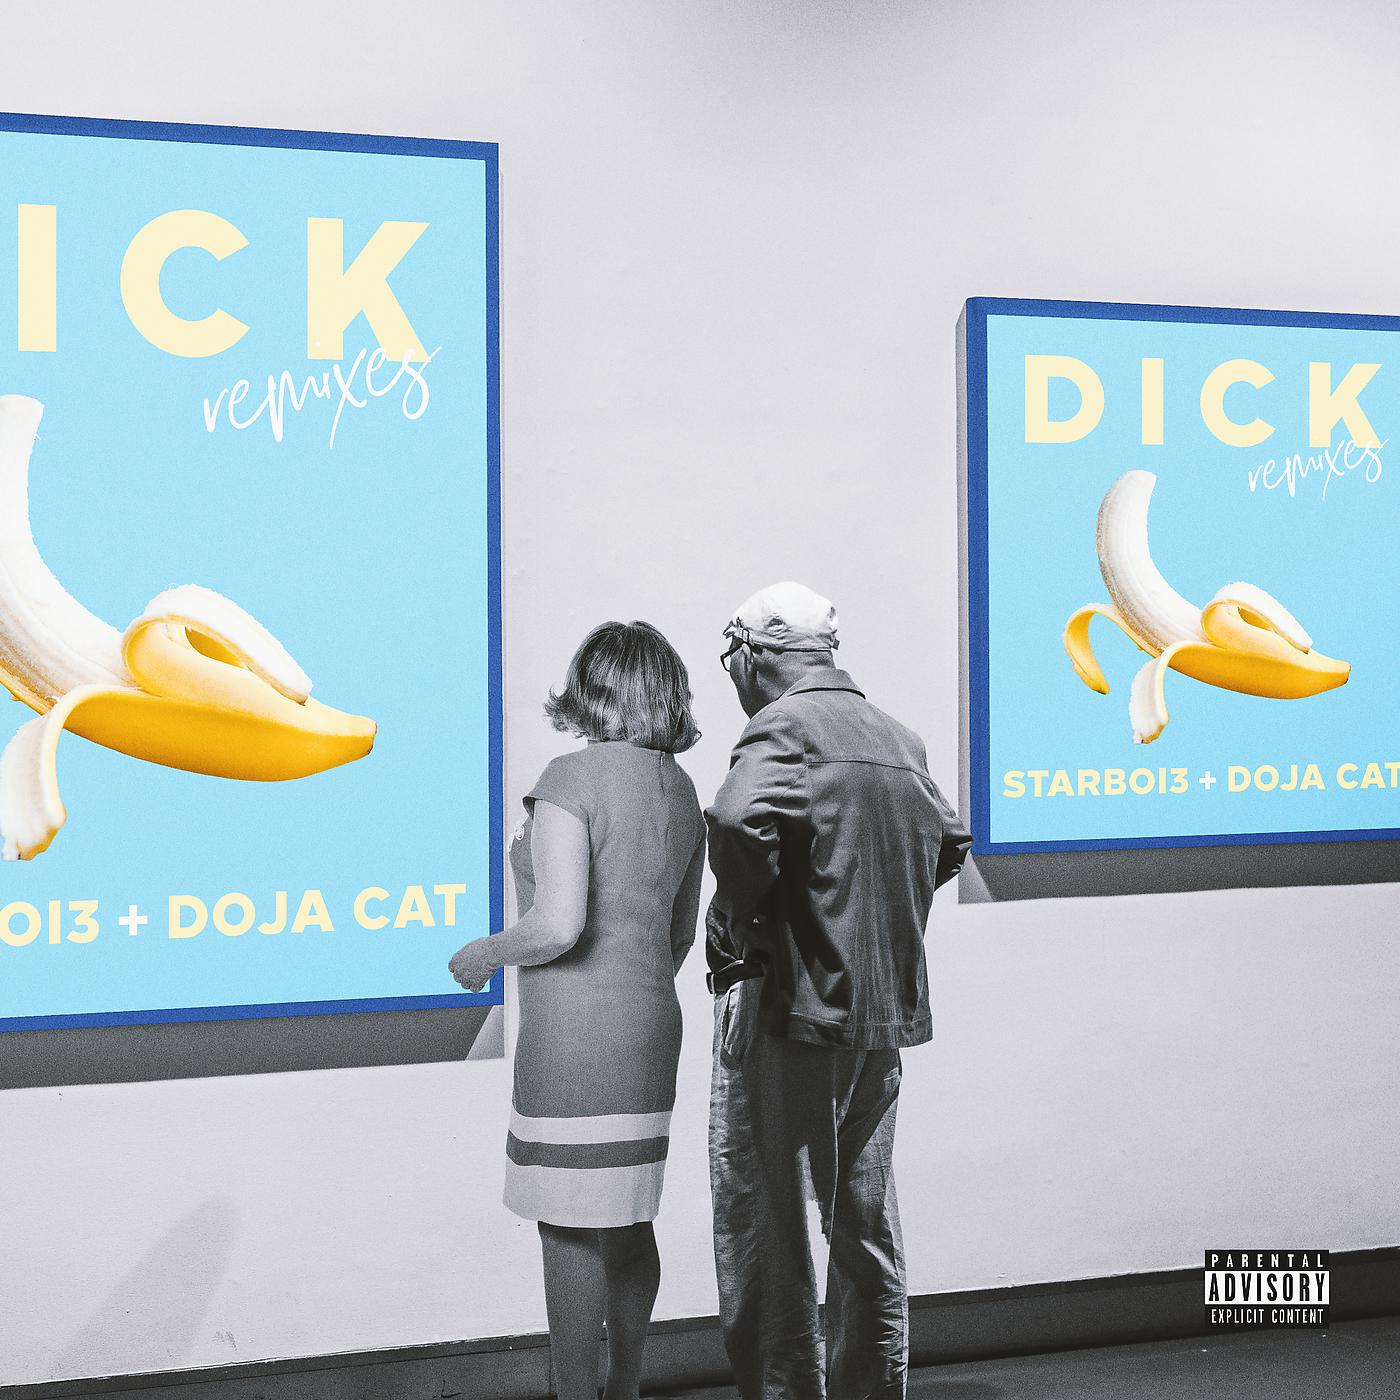 Dick song